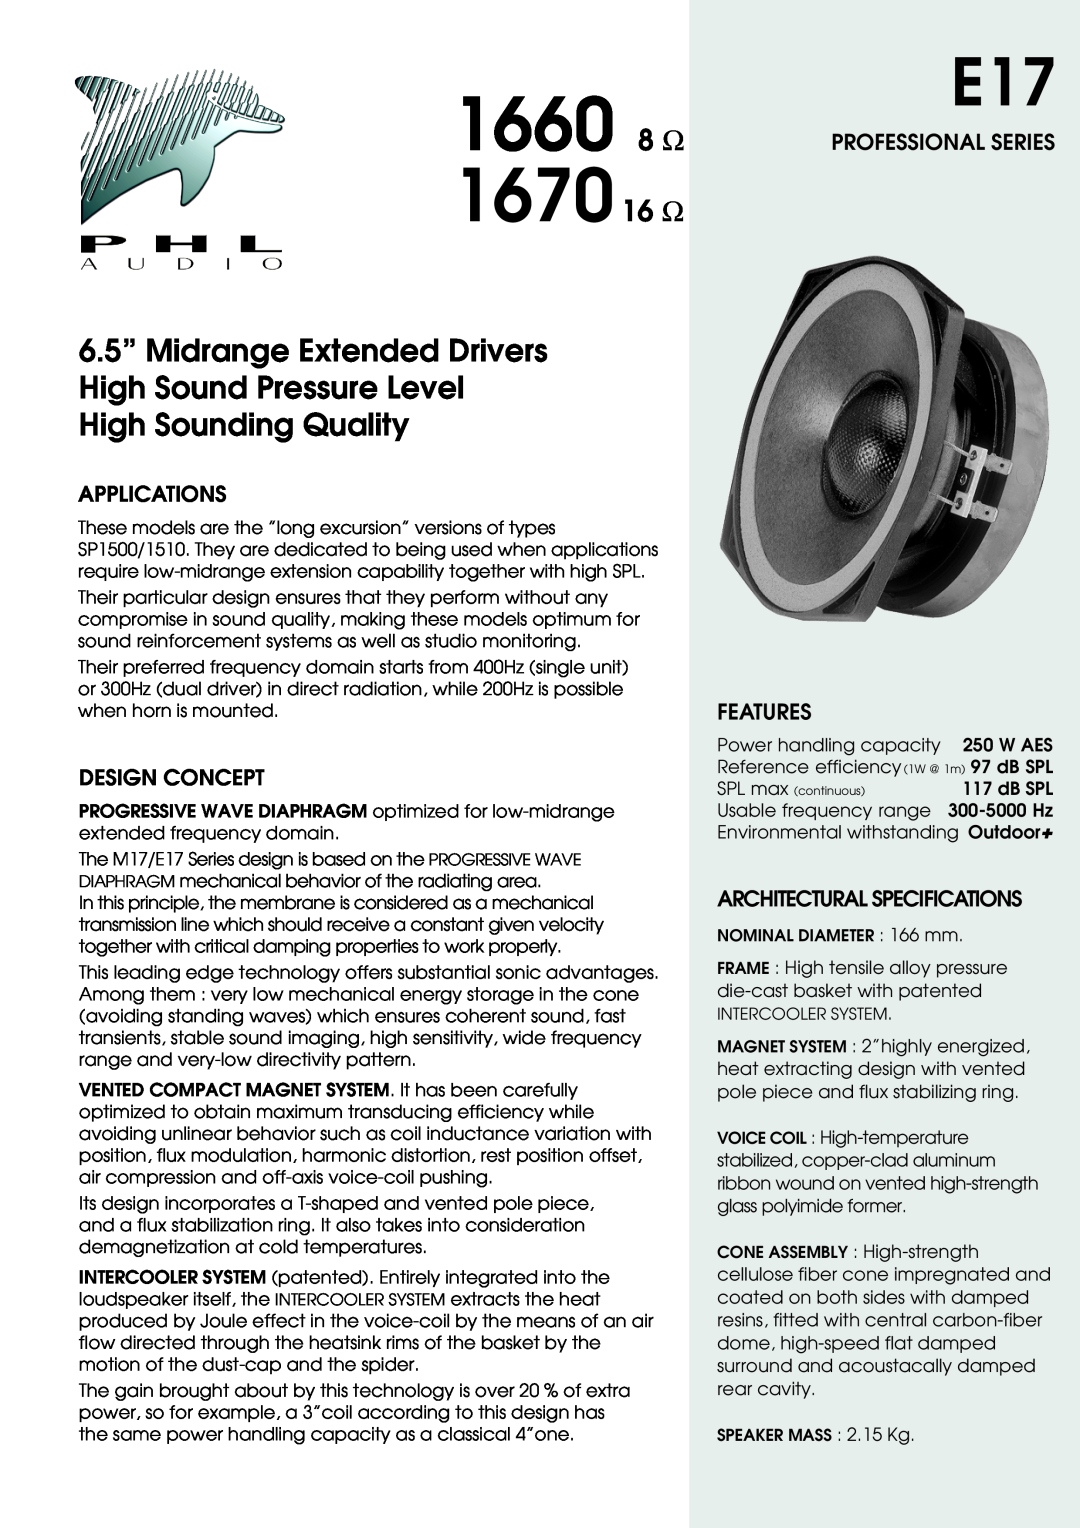 PHL Audio specifications Applications, Design Concept, Features, Architectural Specifications, 1660 8 Ω, 1670 16 Ω 